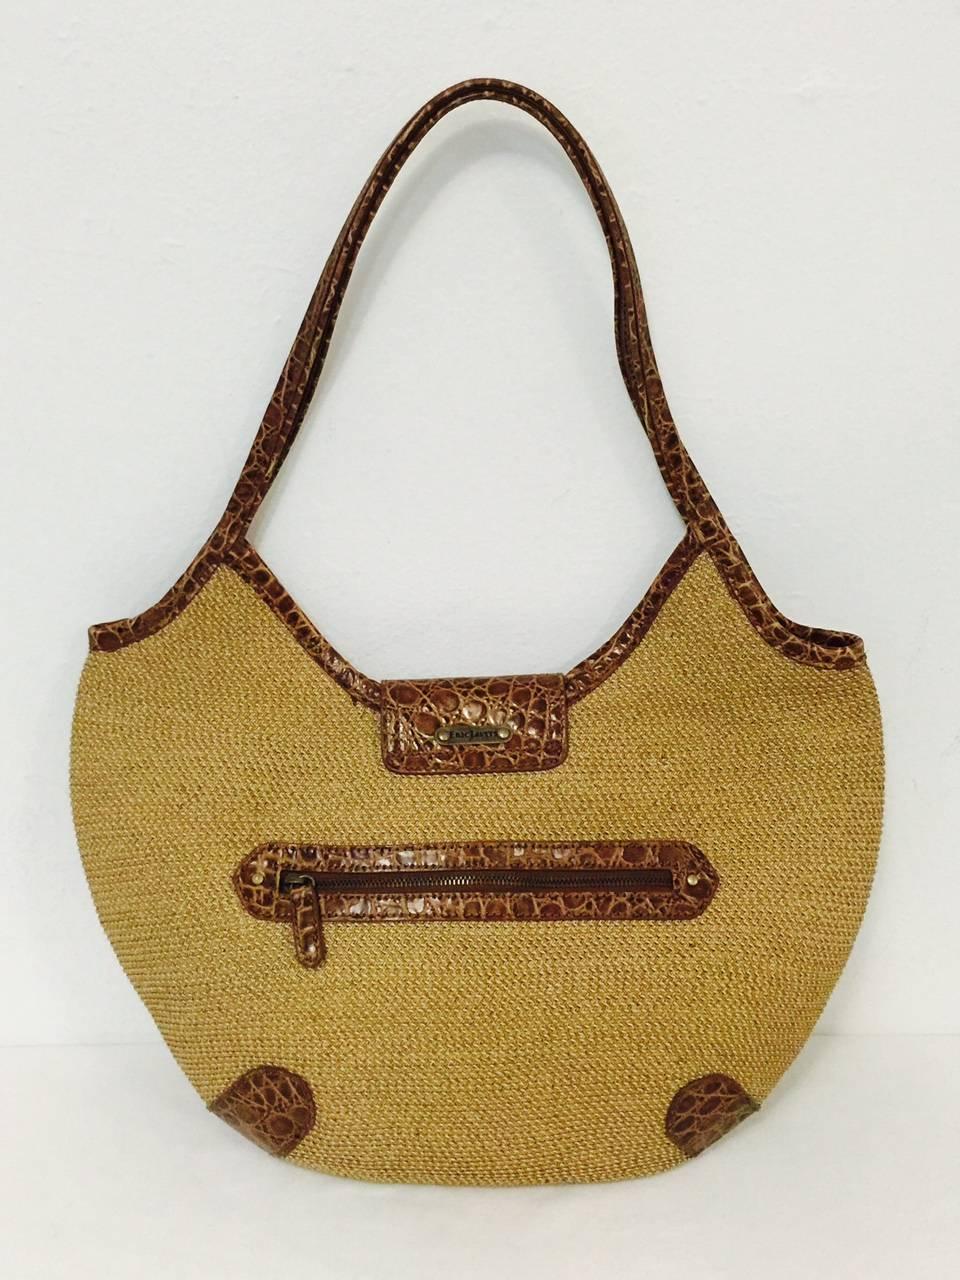 Go to market in style with Eric Javits' Tan Jute Hobo Bag!  Features classic and durable jute exterior and tan canvas interior perfectly complemented by warm brown crocodile embossed leather trim inside and out.  Interior houses several open pockets